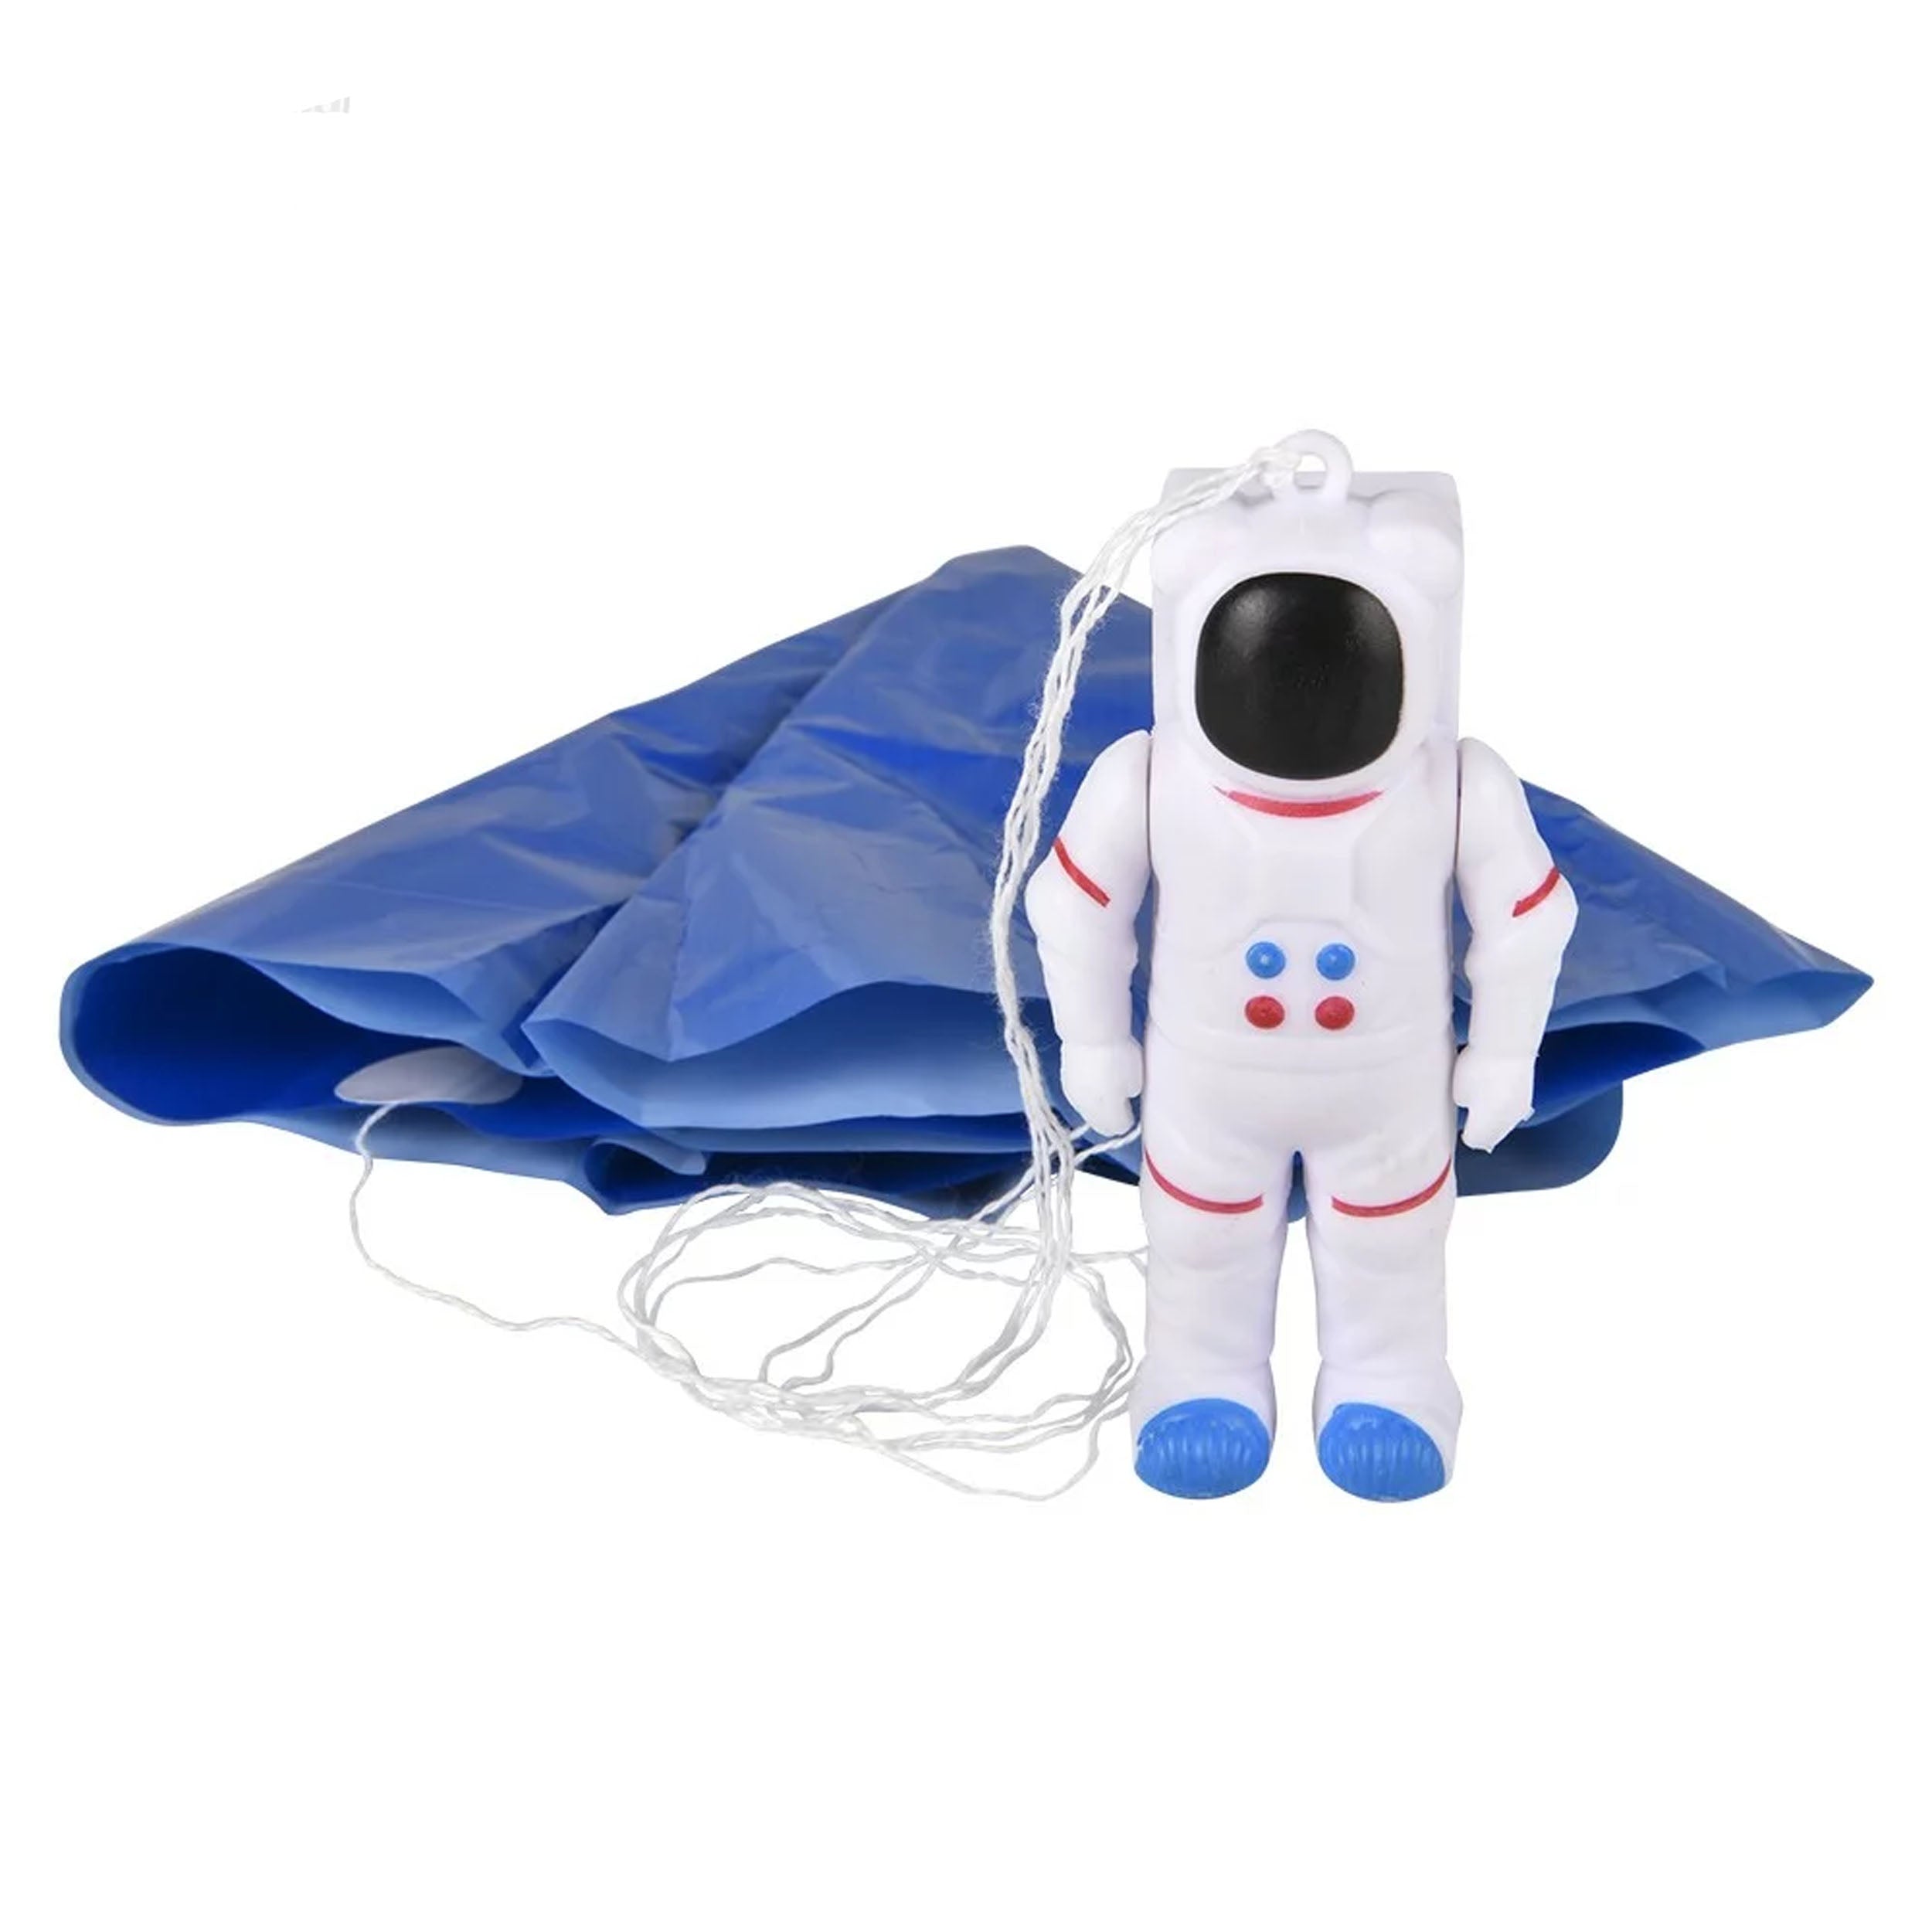 Fun and Exciting Space Adventure Paratrooper 3" Toy For Kids & Toddler- MOQ 24